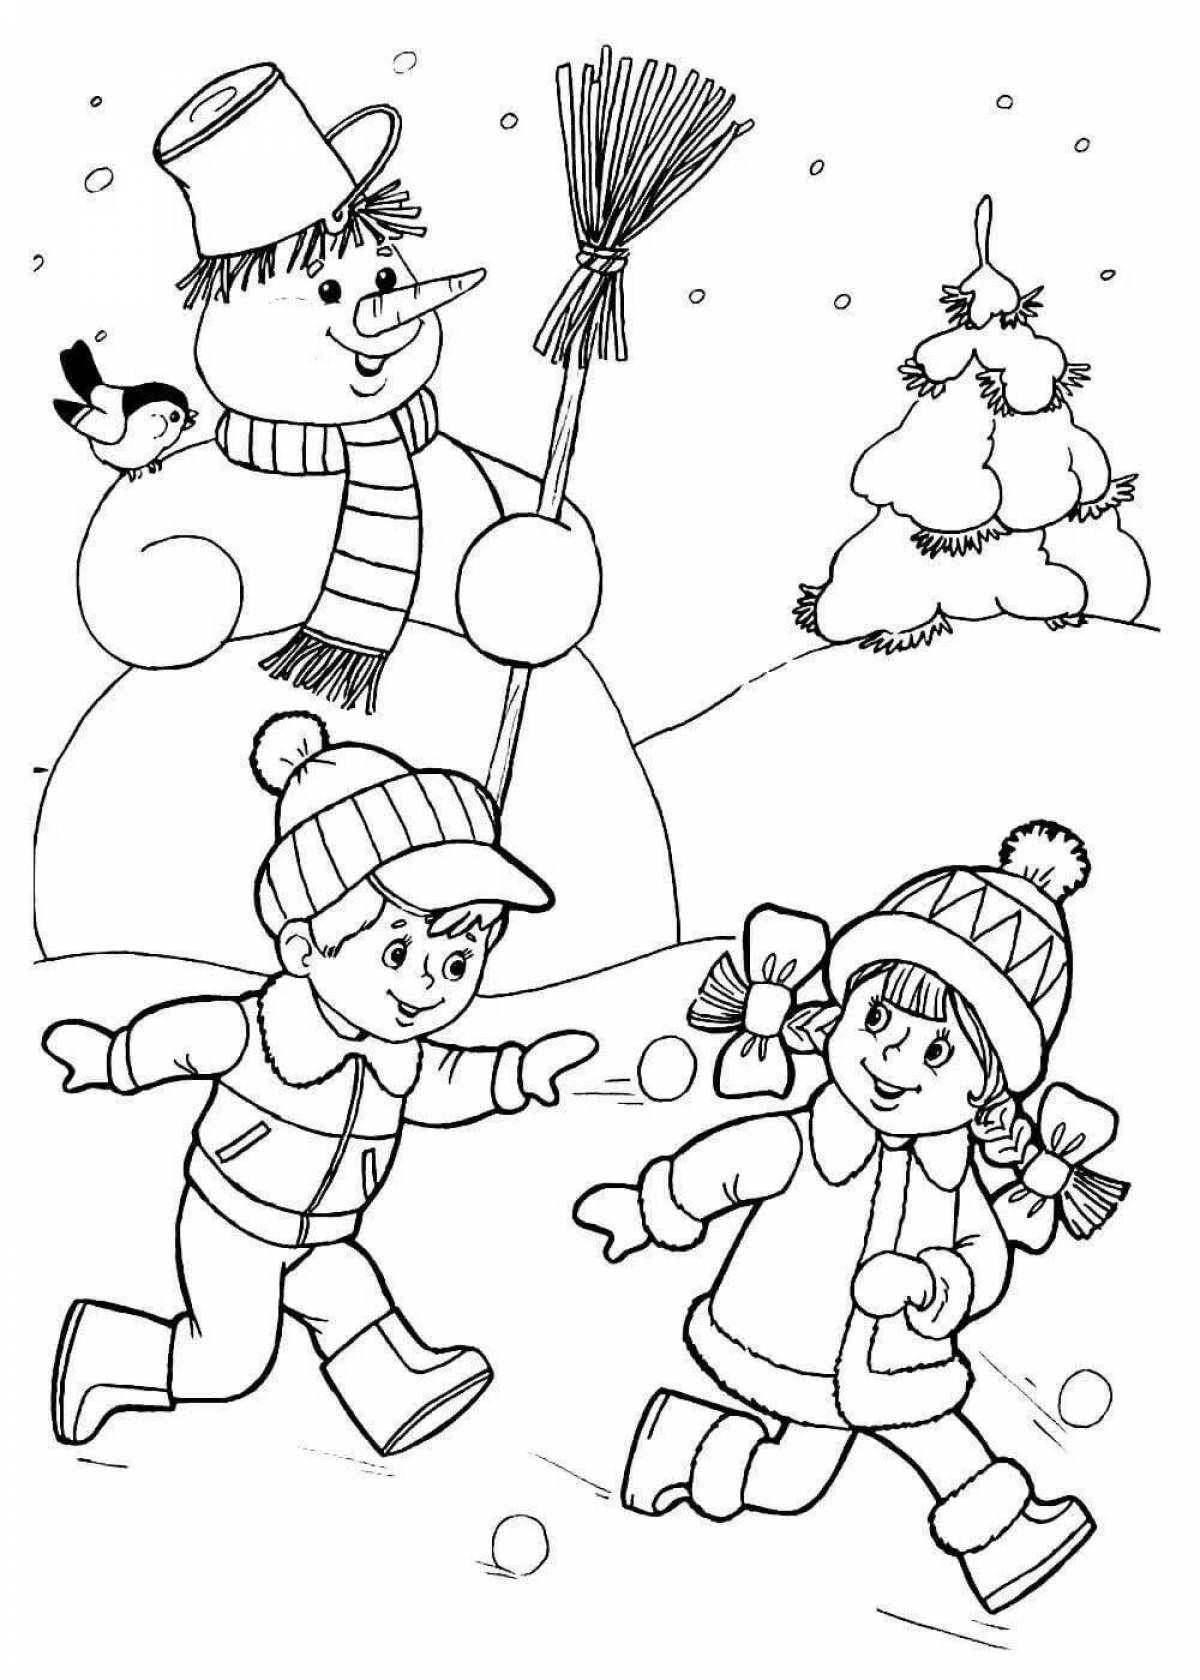 Funny christmas coloring game